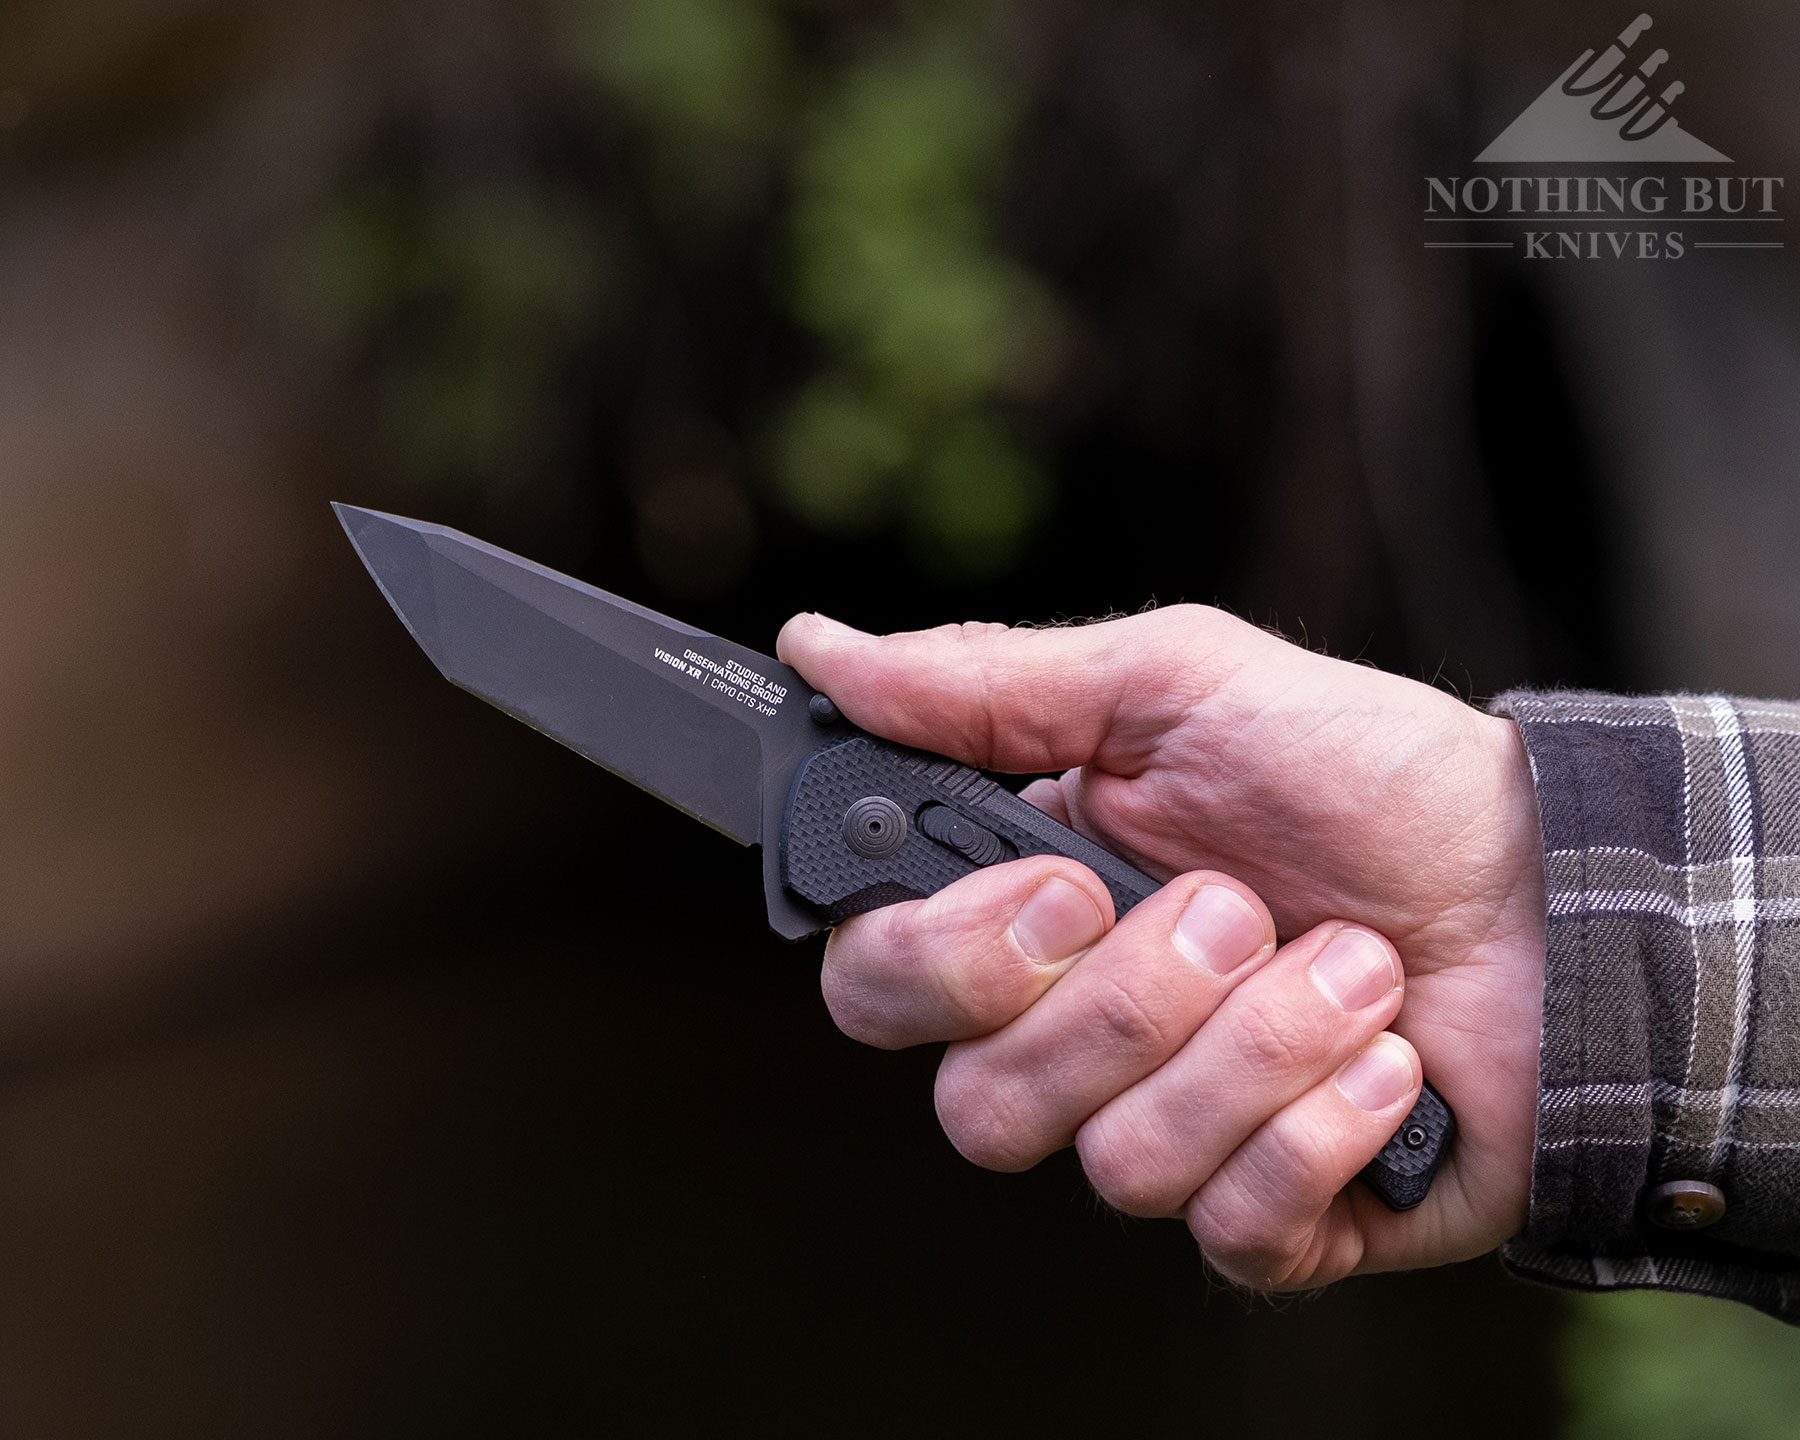 A person's hand holding the SOG Vision XR to show the knife's ergonomic handle in use.